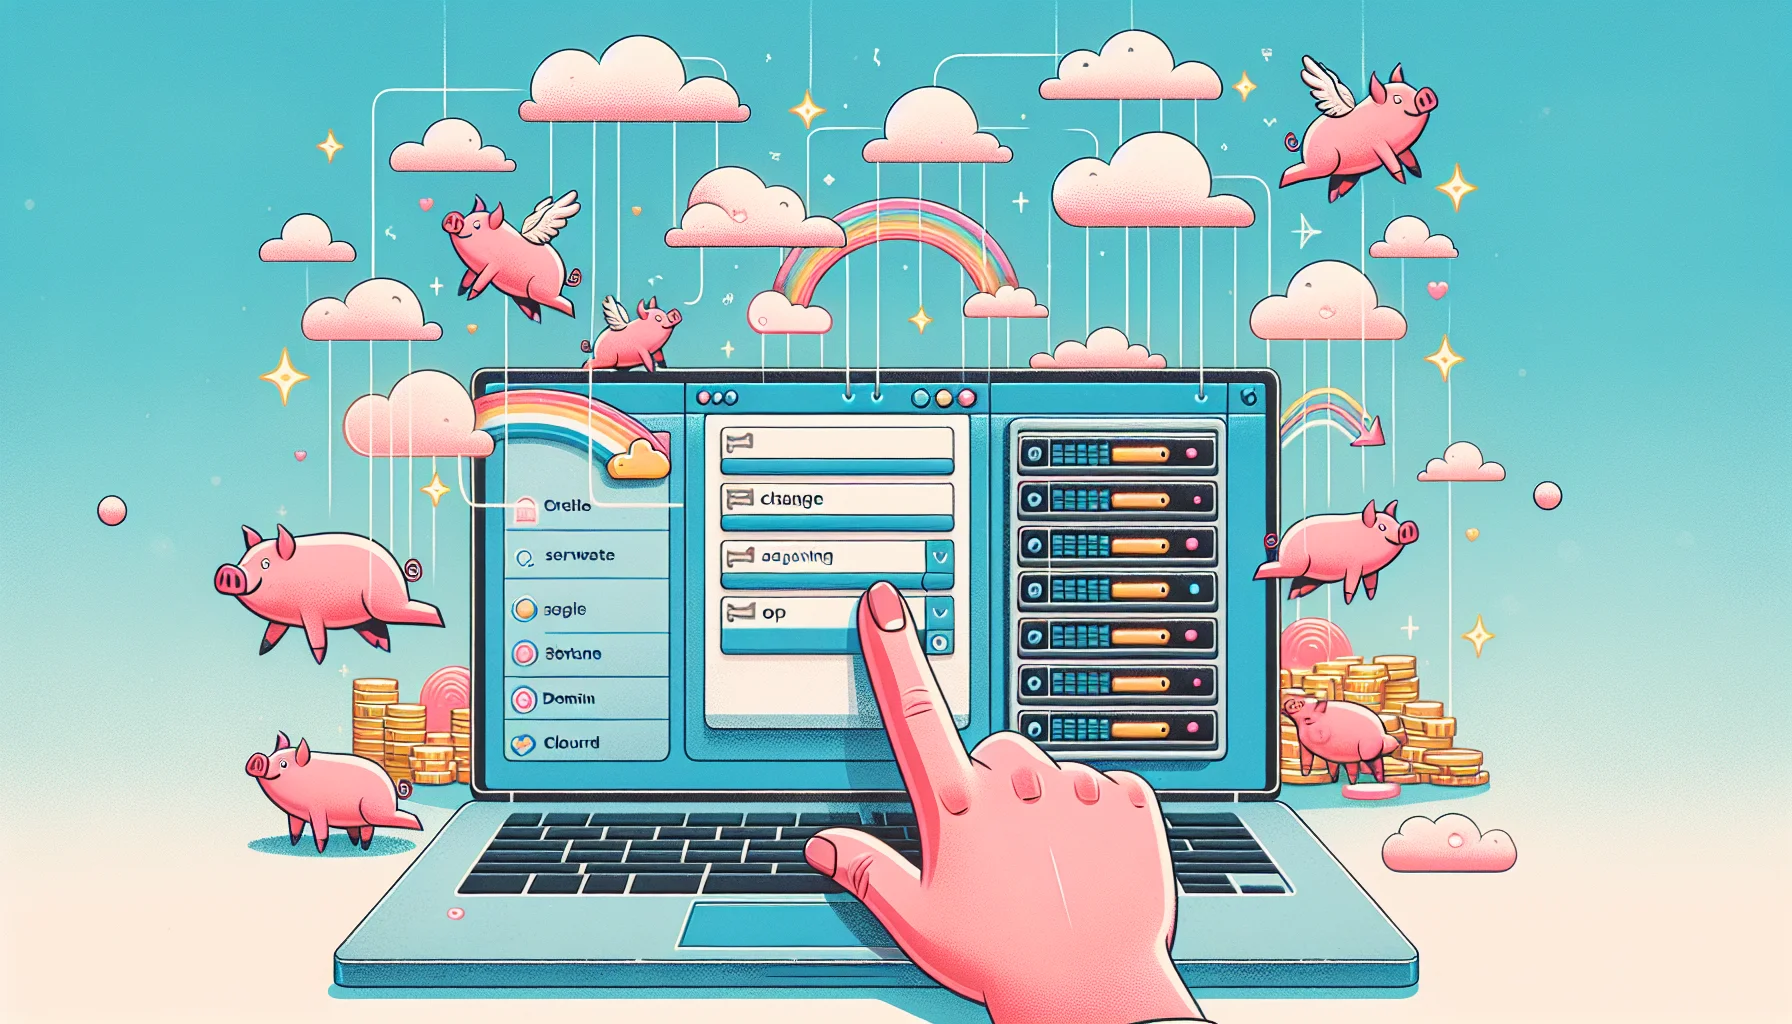 Create a lighthearted and engaging illustration that humorously depicts the process of changing a website template on a popular web hosting platform, Wix. The picture should include an animated laptop screen showcasing the interior of the platform where an unidentified hand is adjusting a whimsical template with flying pigs and rainbow headers. Include symbols indicative of the web hosting theme such as, stylized server racks, domain names floating in the ether, and a glowing cloud denoting cloud storage. Please ensure the style is inviting and user-friendly, indicating a simple and enjoyable operation.